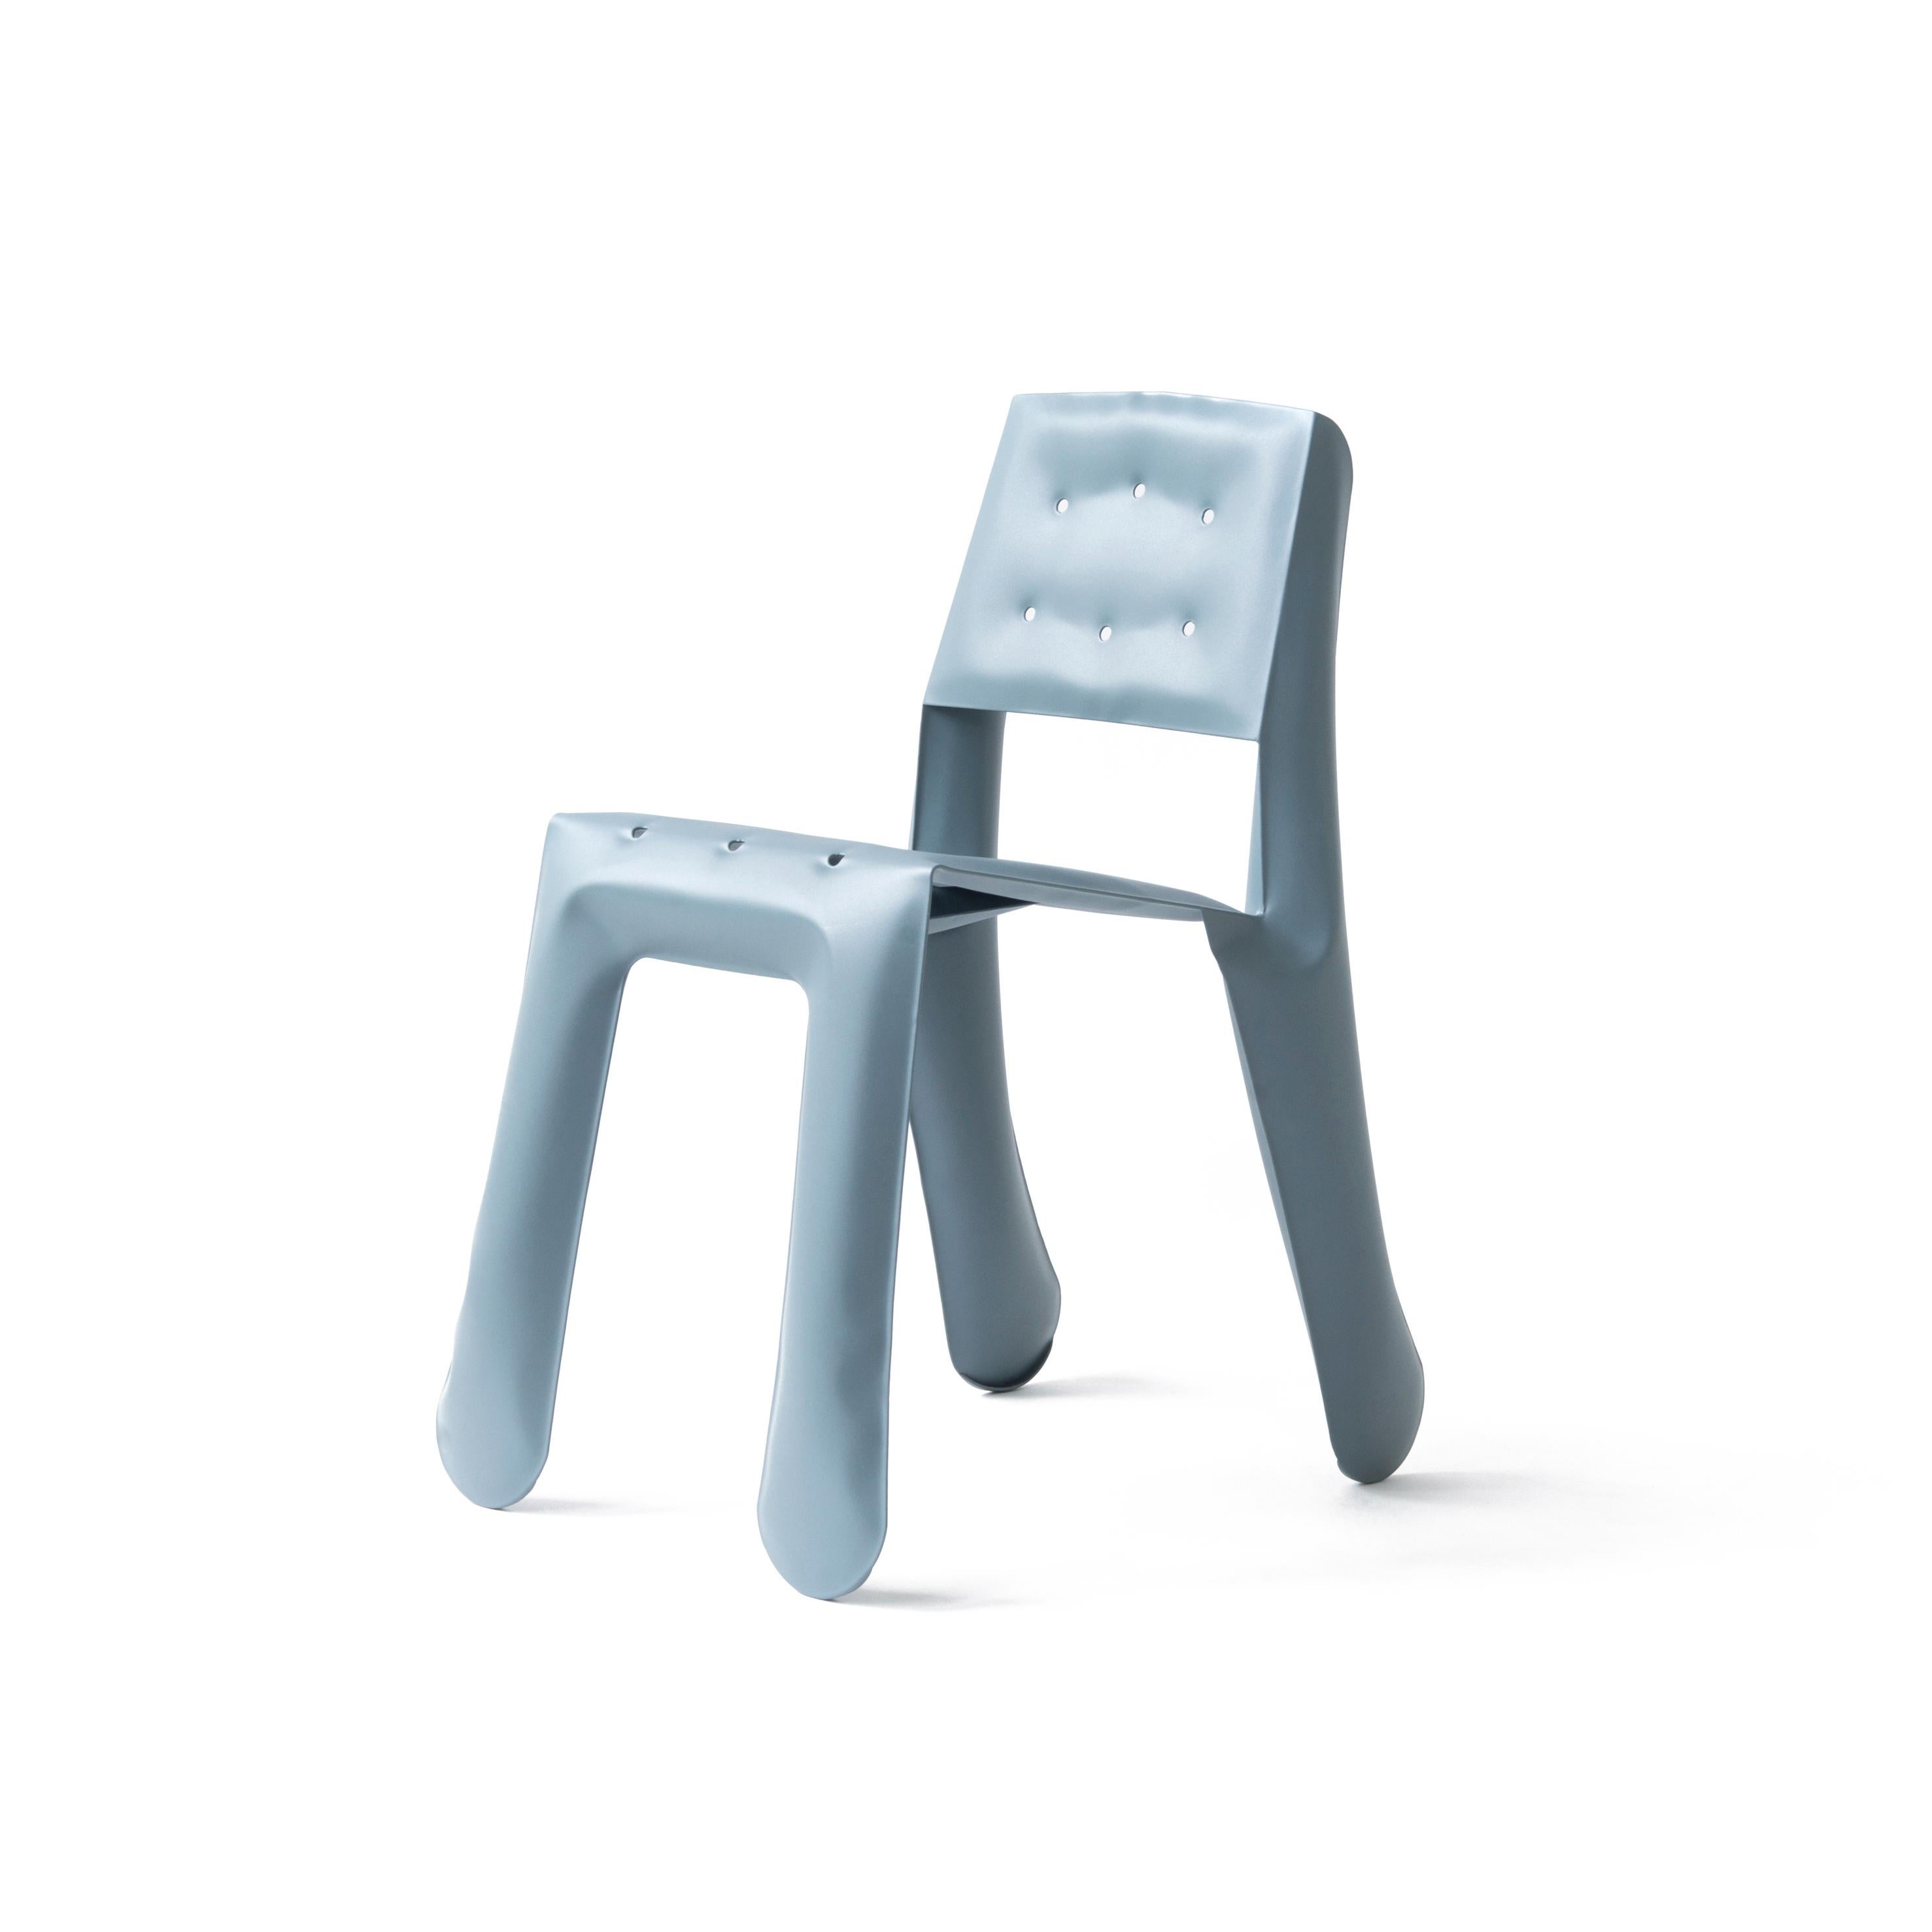 Blue Grey Carbon Steel Chippensteel 0.5 Sculptural Chair by Zieta
Dimensions: D 58 x W 46 x H 80 cm 
Material: Carbon Steel. 
Finish: Powder-coated. Matt finish. 
Also available in colors: white matt, beige, black, blue-gray, graphite, moss-gray,